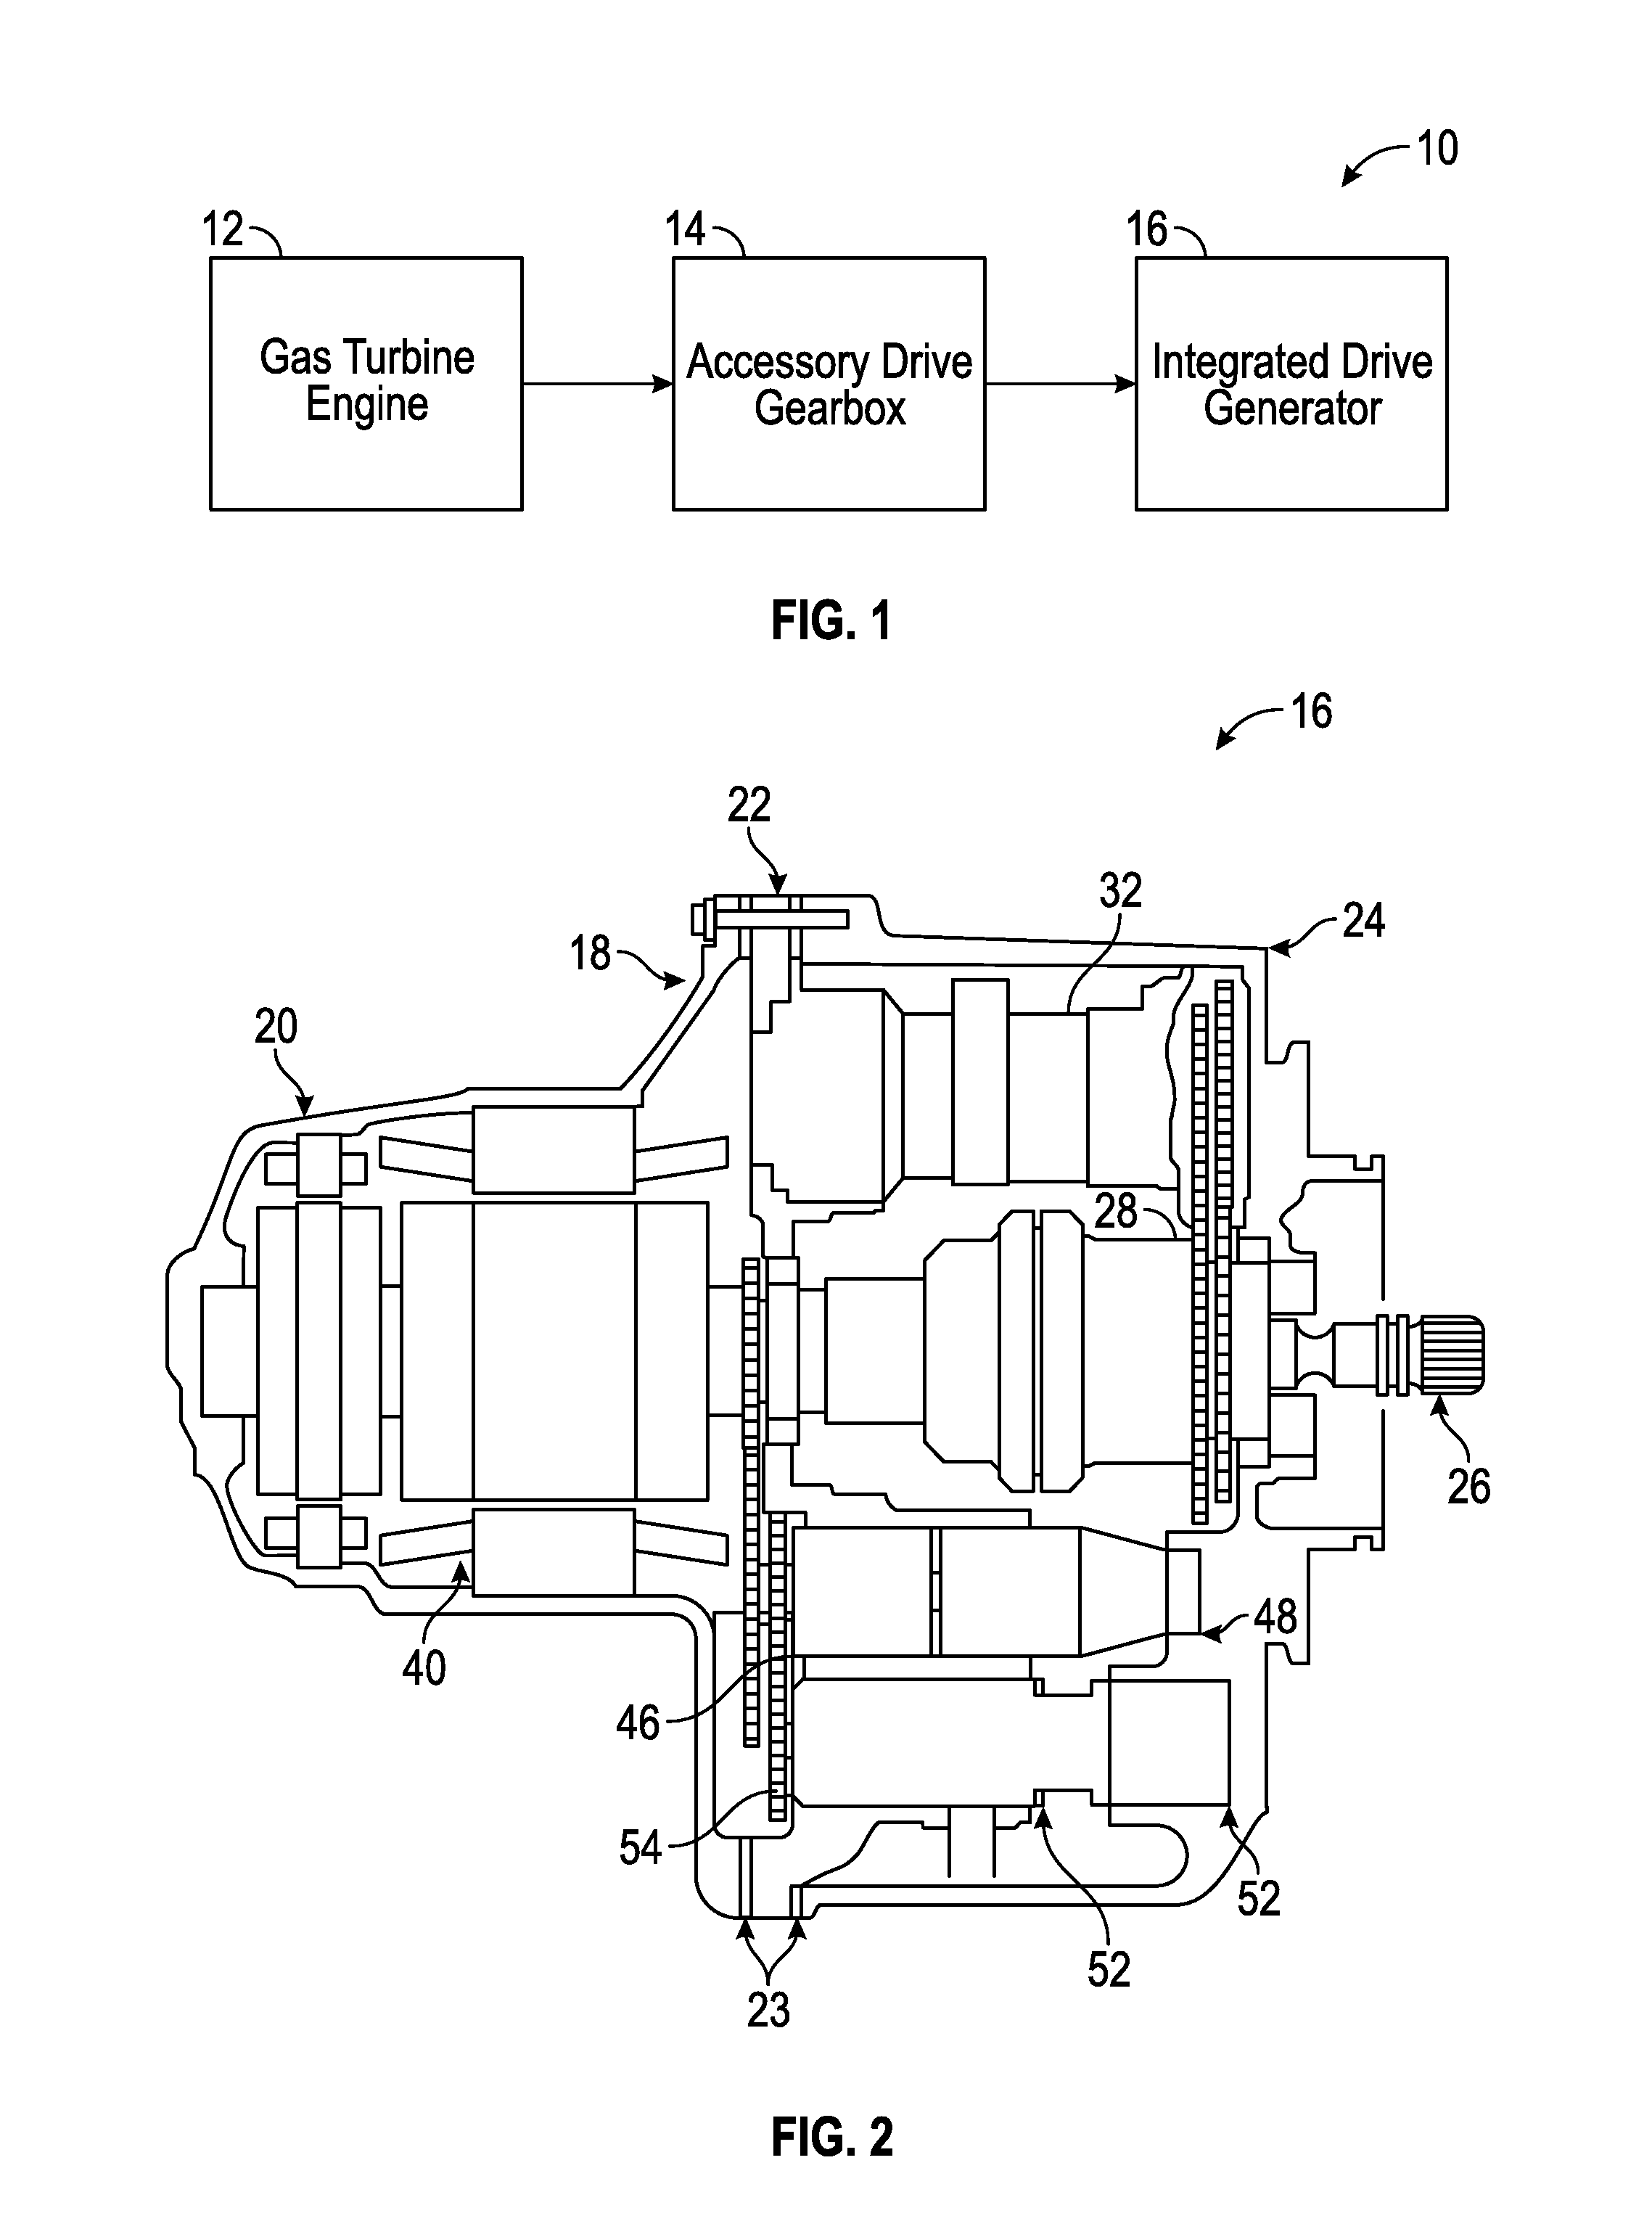 Disconnect shaft for an integrated drive generator (IDG)